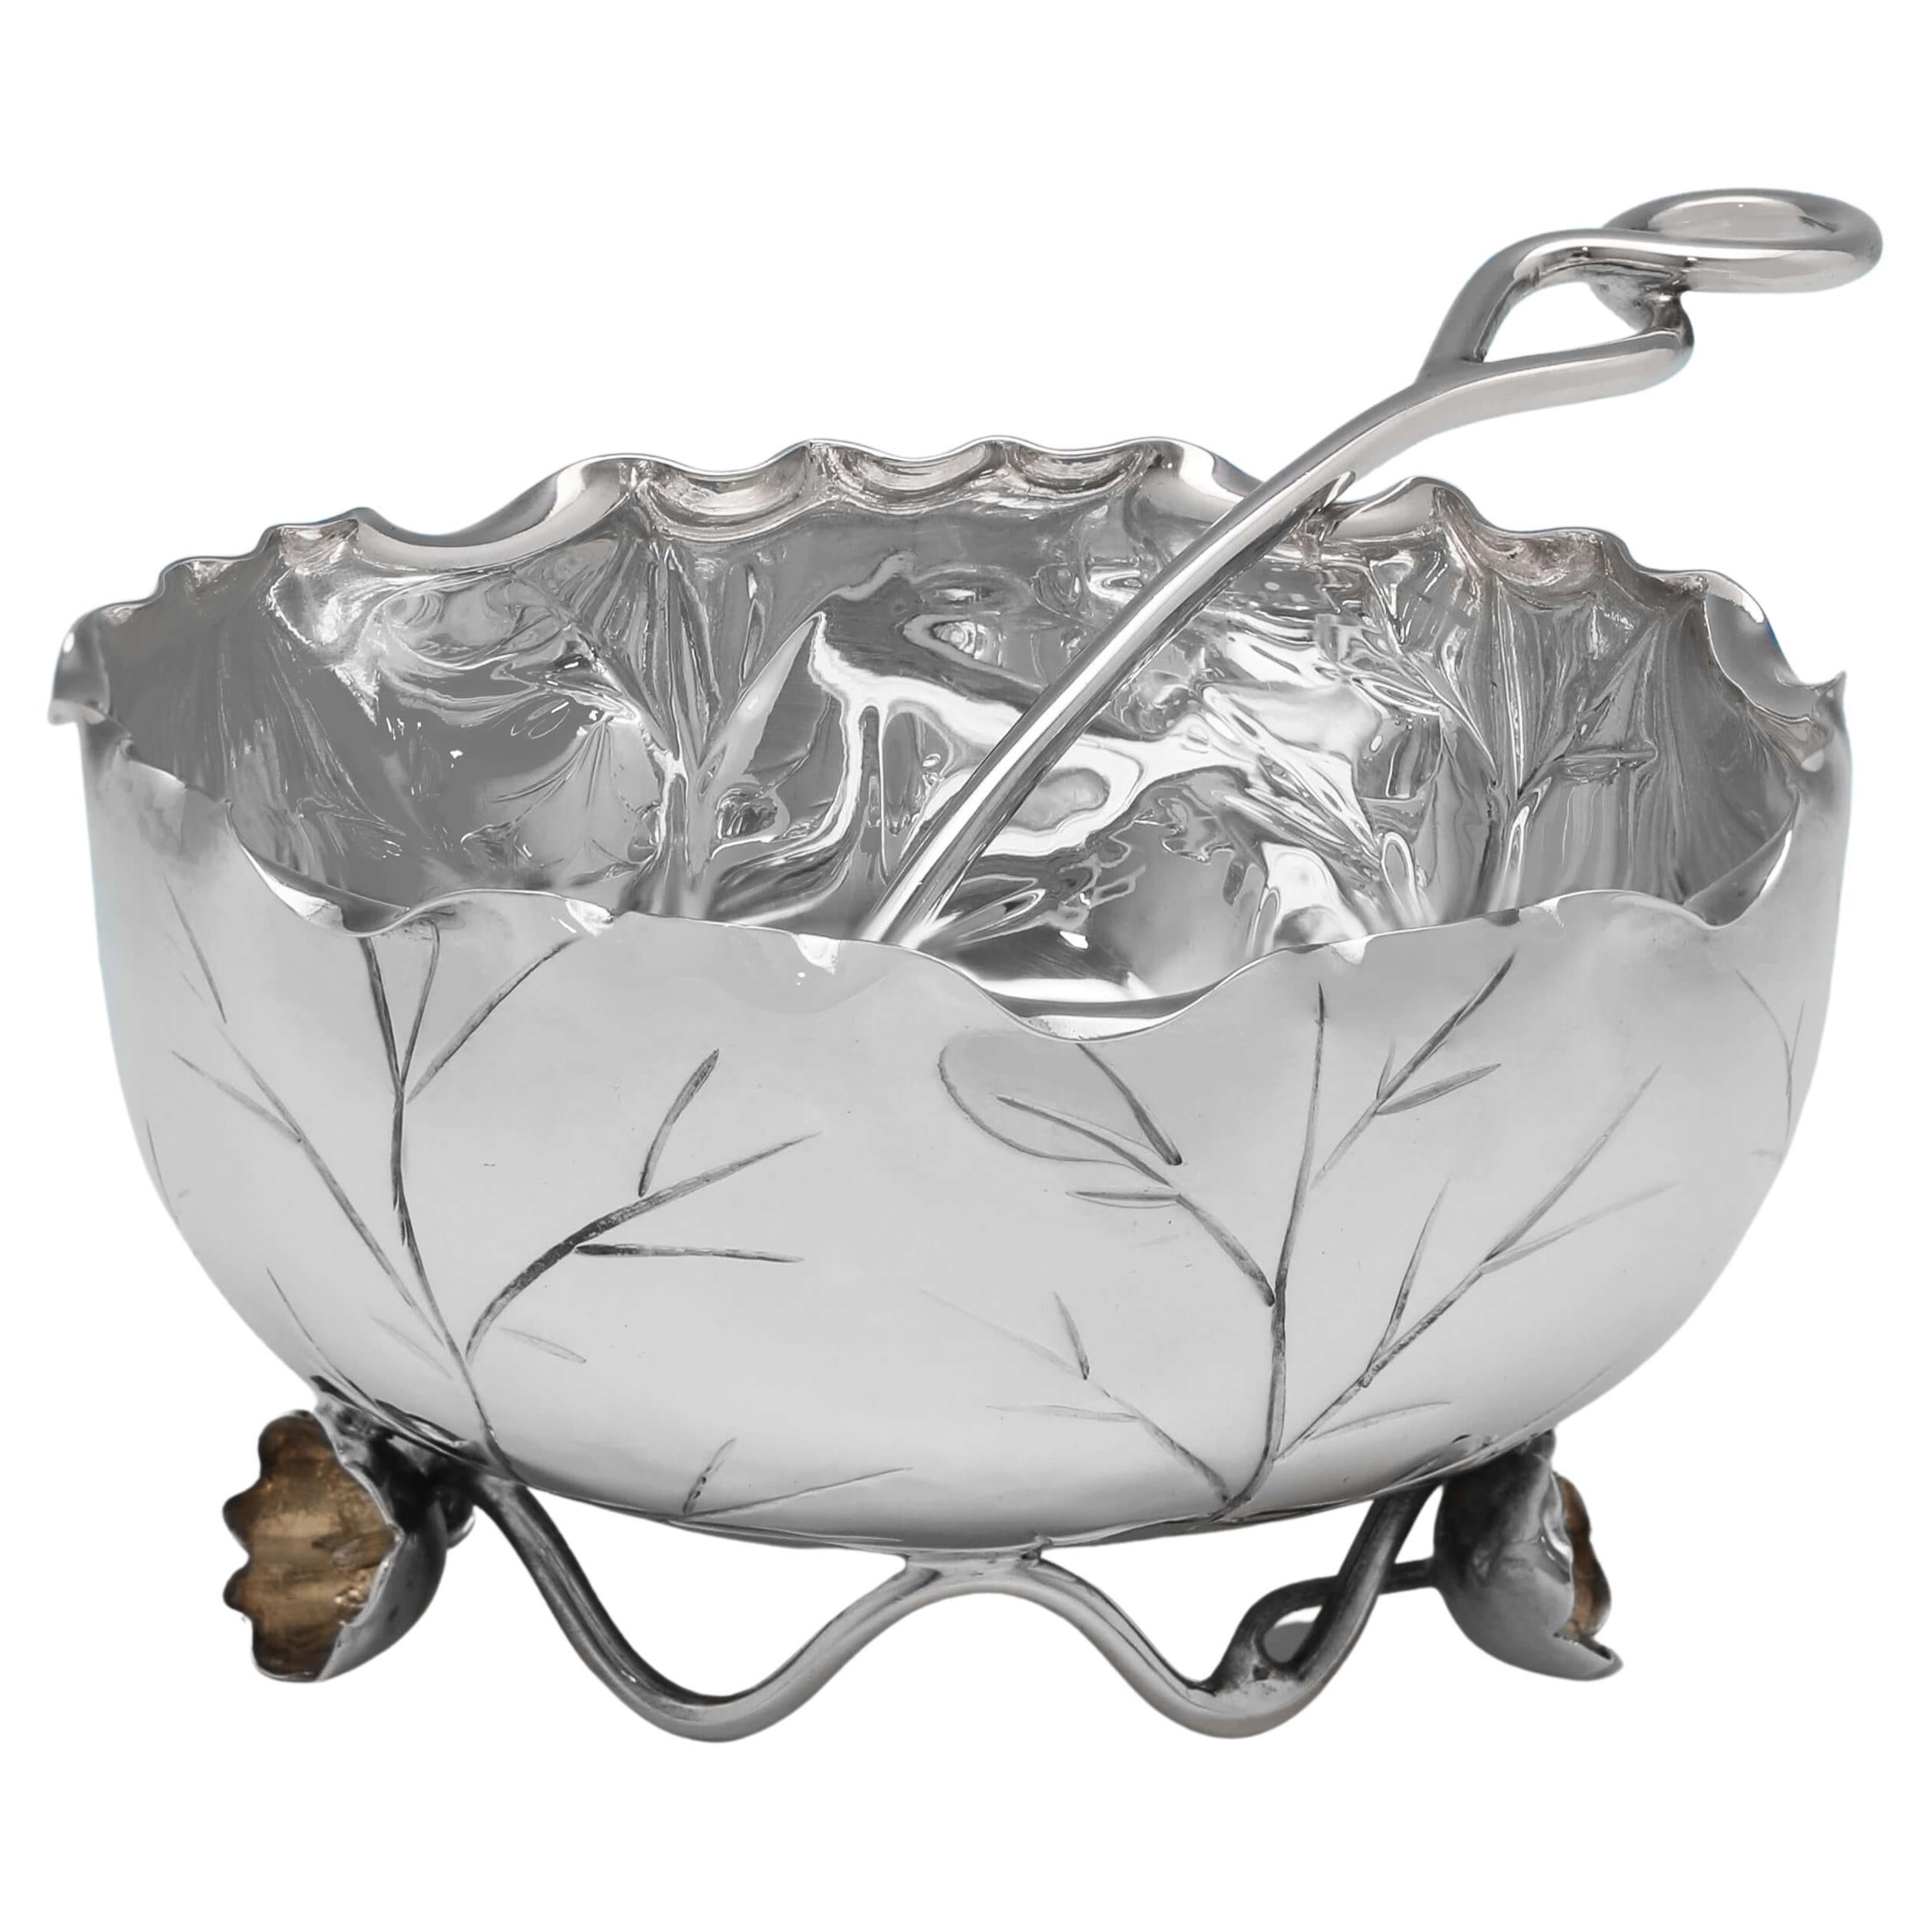 Art Nouveau Antique Sterling Silver Sugar Bowl & Matching Sifting Spoon, 1908